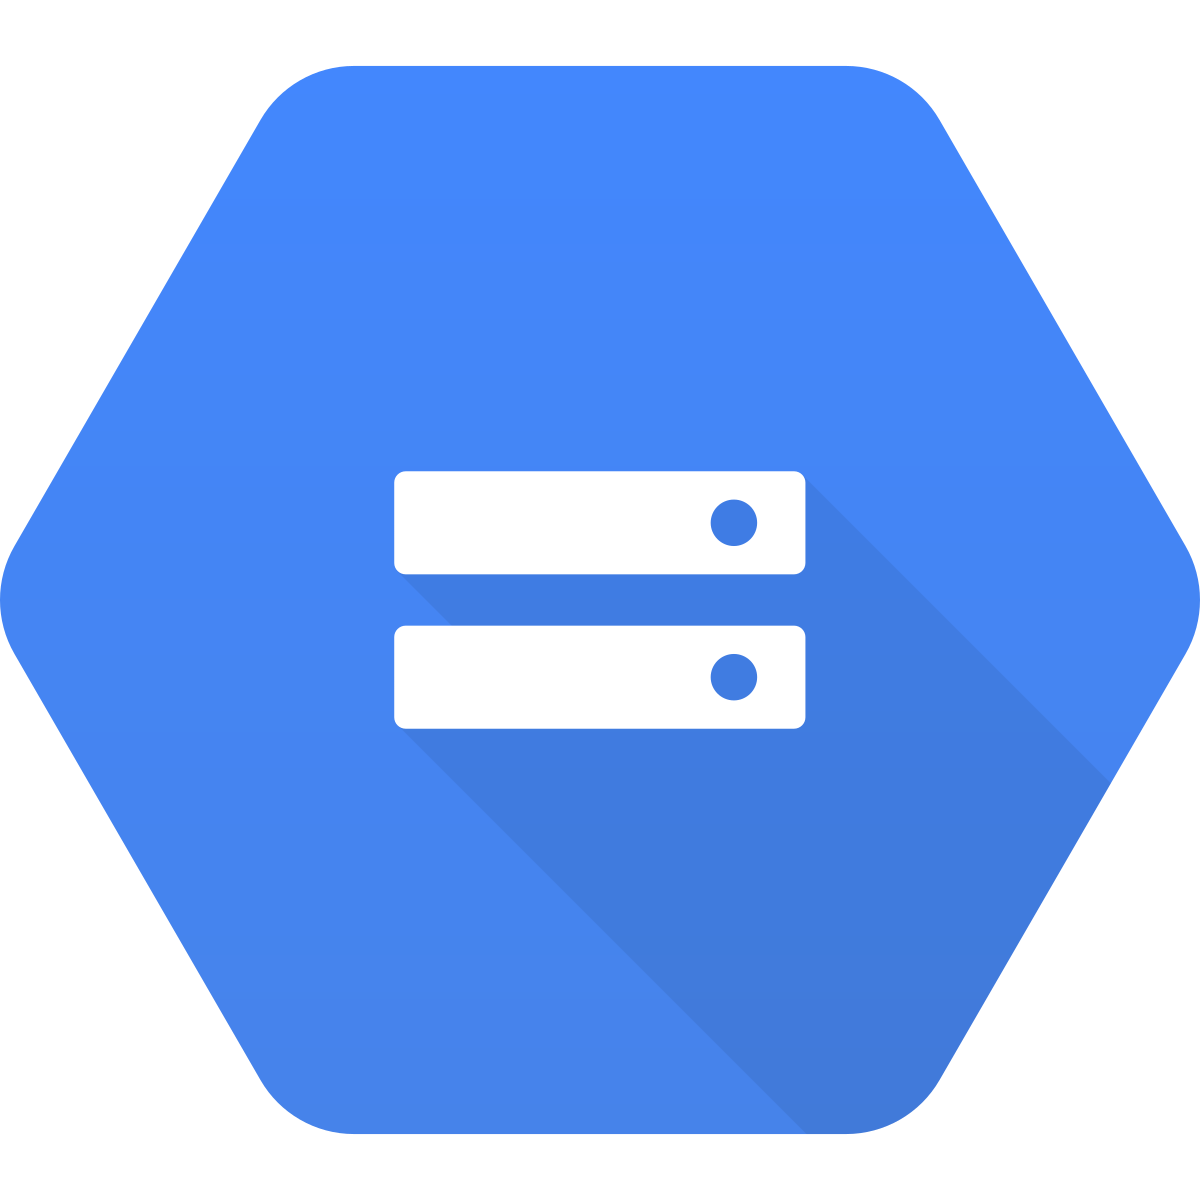 Sync data from Google Cloud Storage to Google Drive.